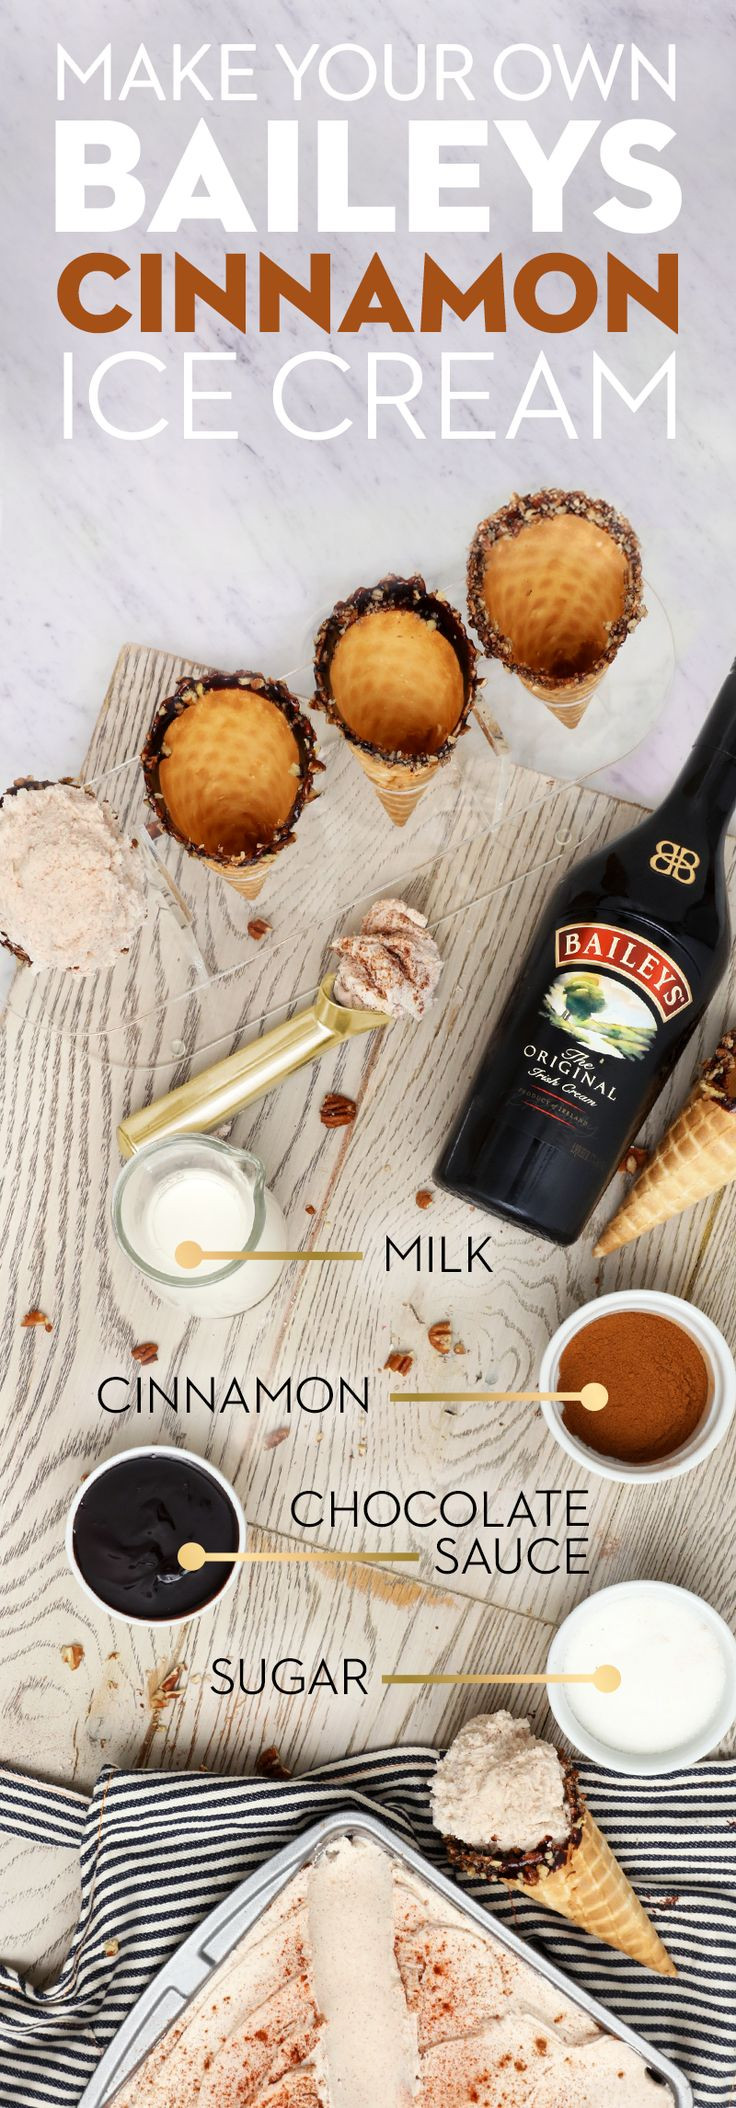 Fall Flavors For Desserts
 8 best Baileys Fall Flavors images on Pinterest